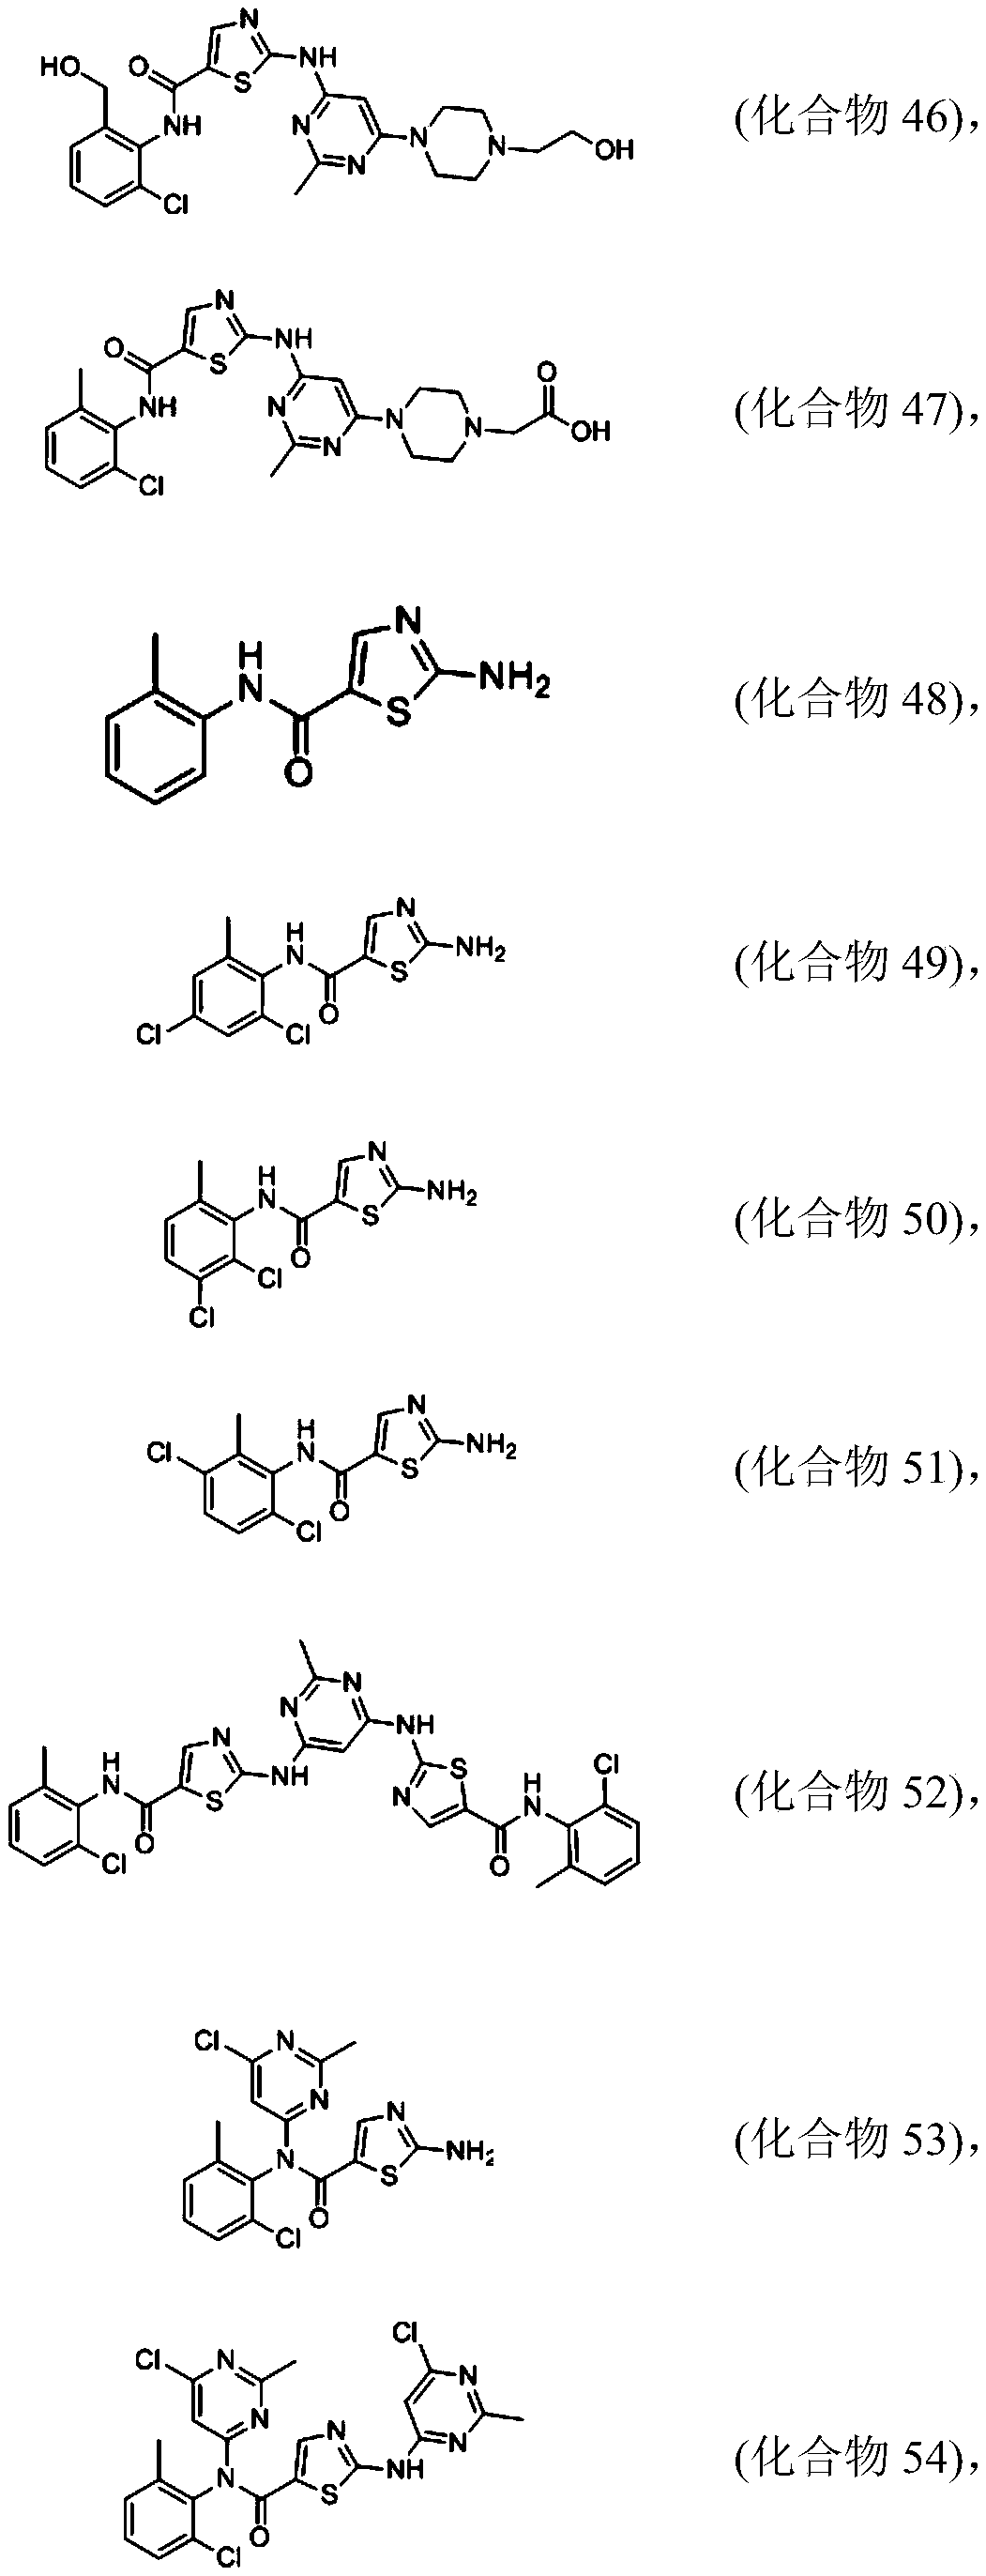 Application of composition containing heterocyclic compound in preparation of drug for treating leukemia